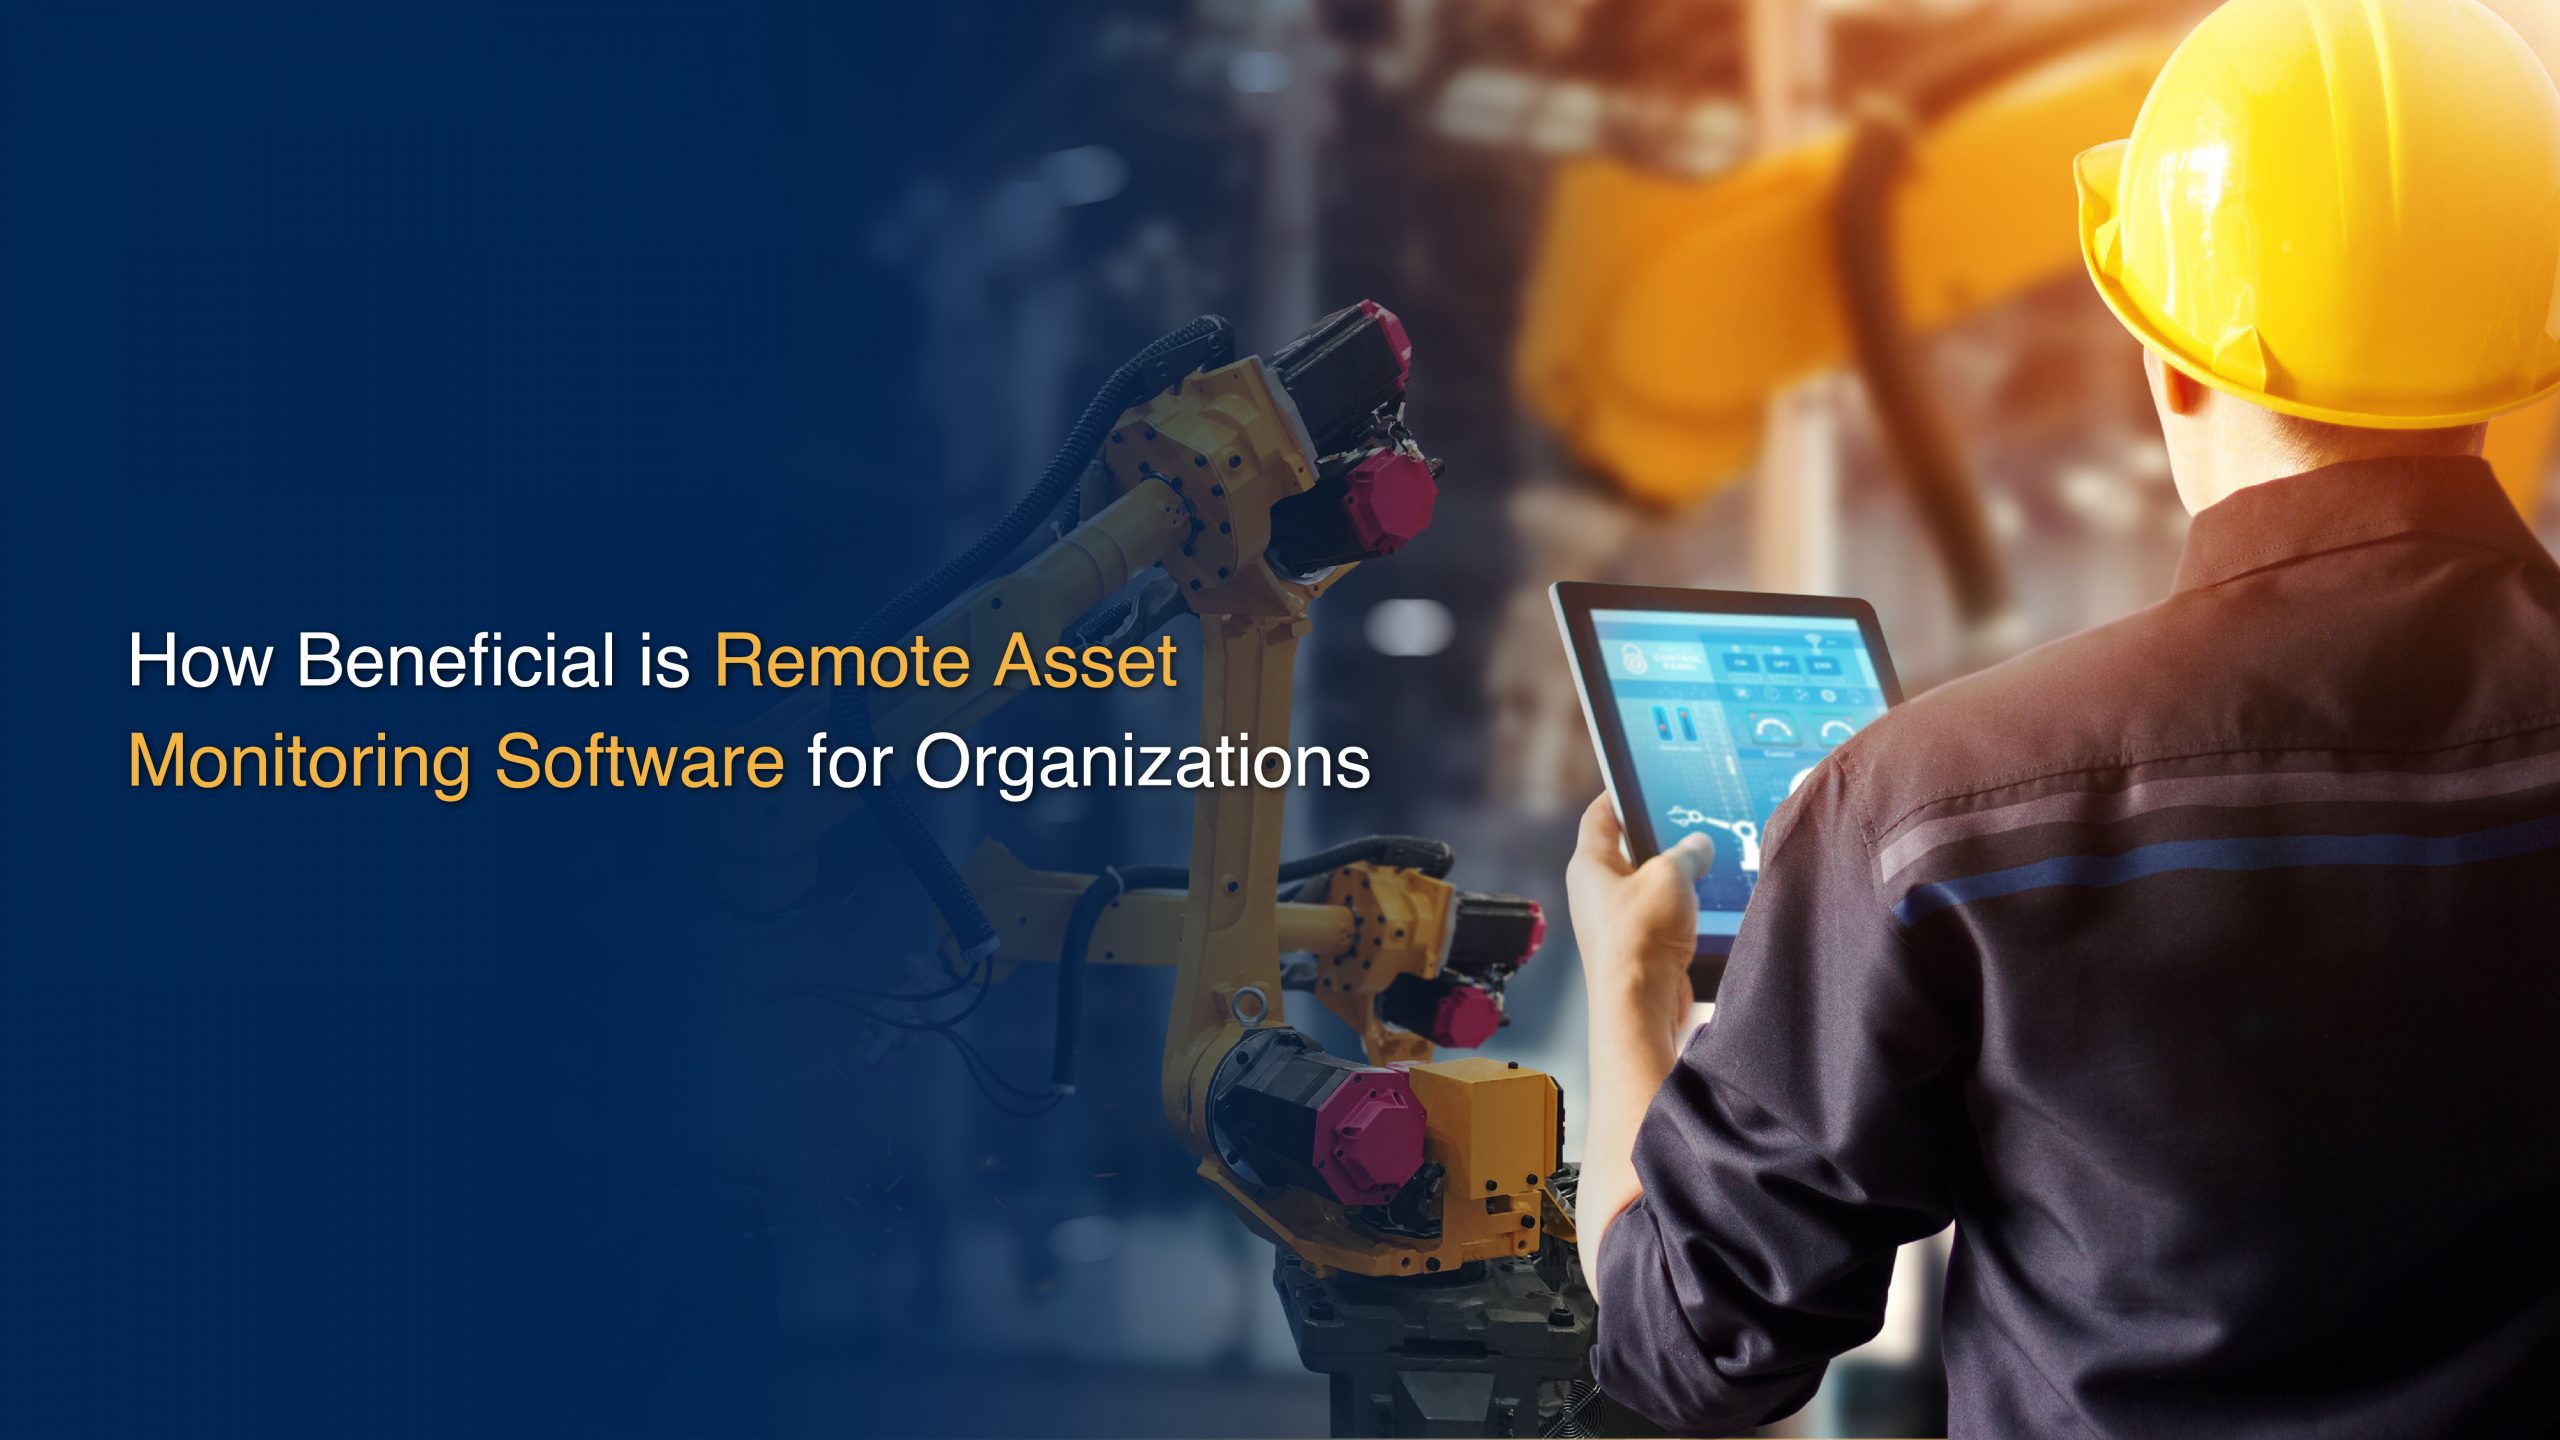 How Beneficial is Remote Asset Monitoring Software for Organizations